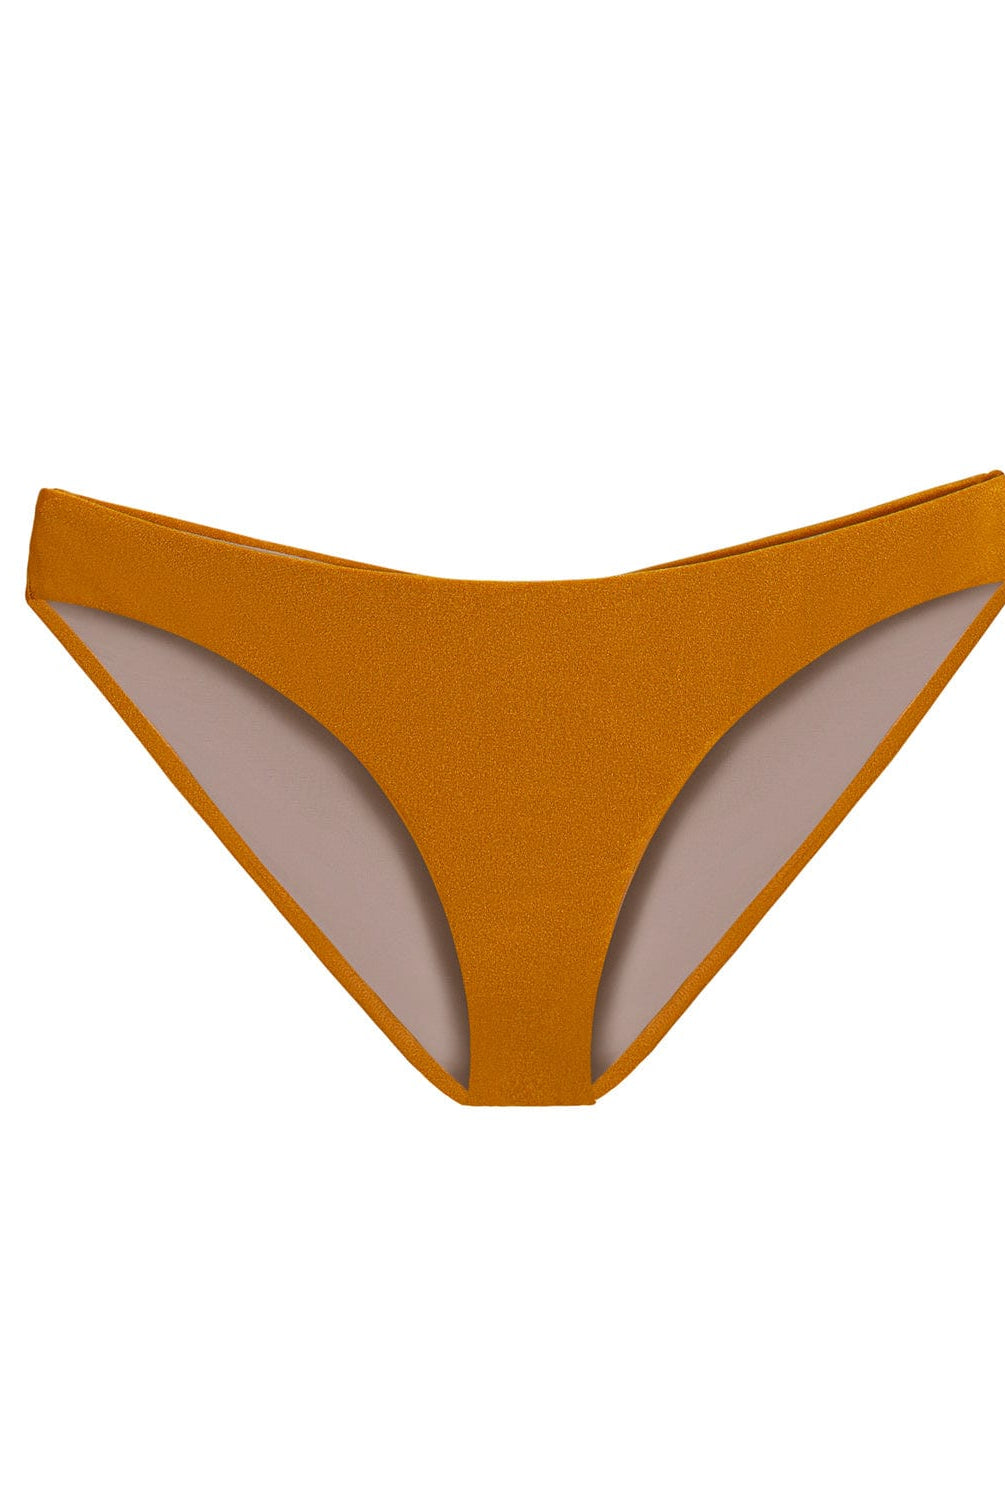 An orange ruched bikini bottom in full coverage.  Featured against a white wall background.